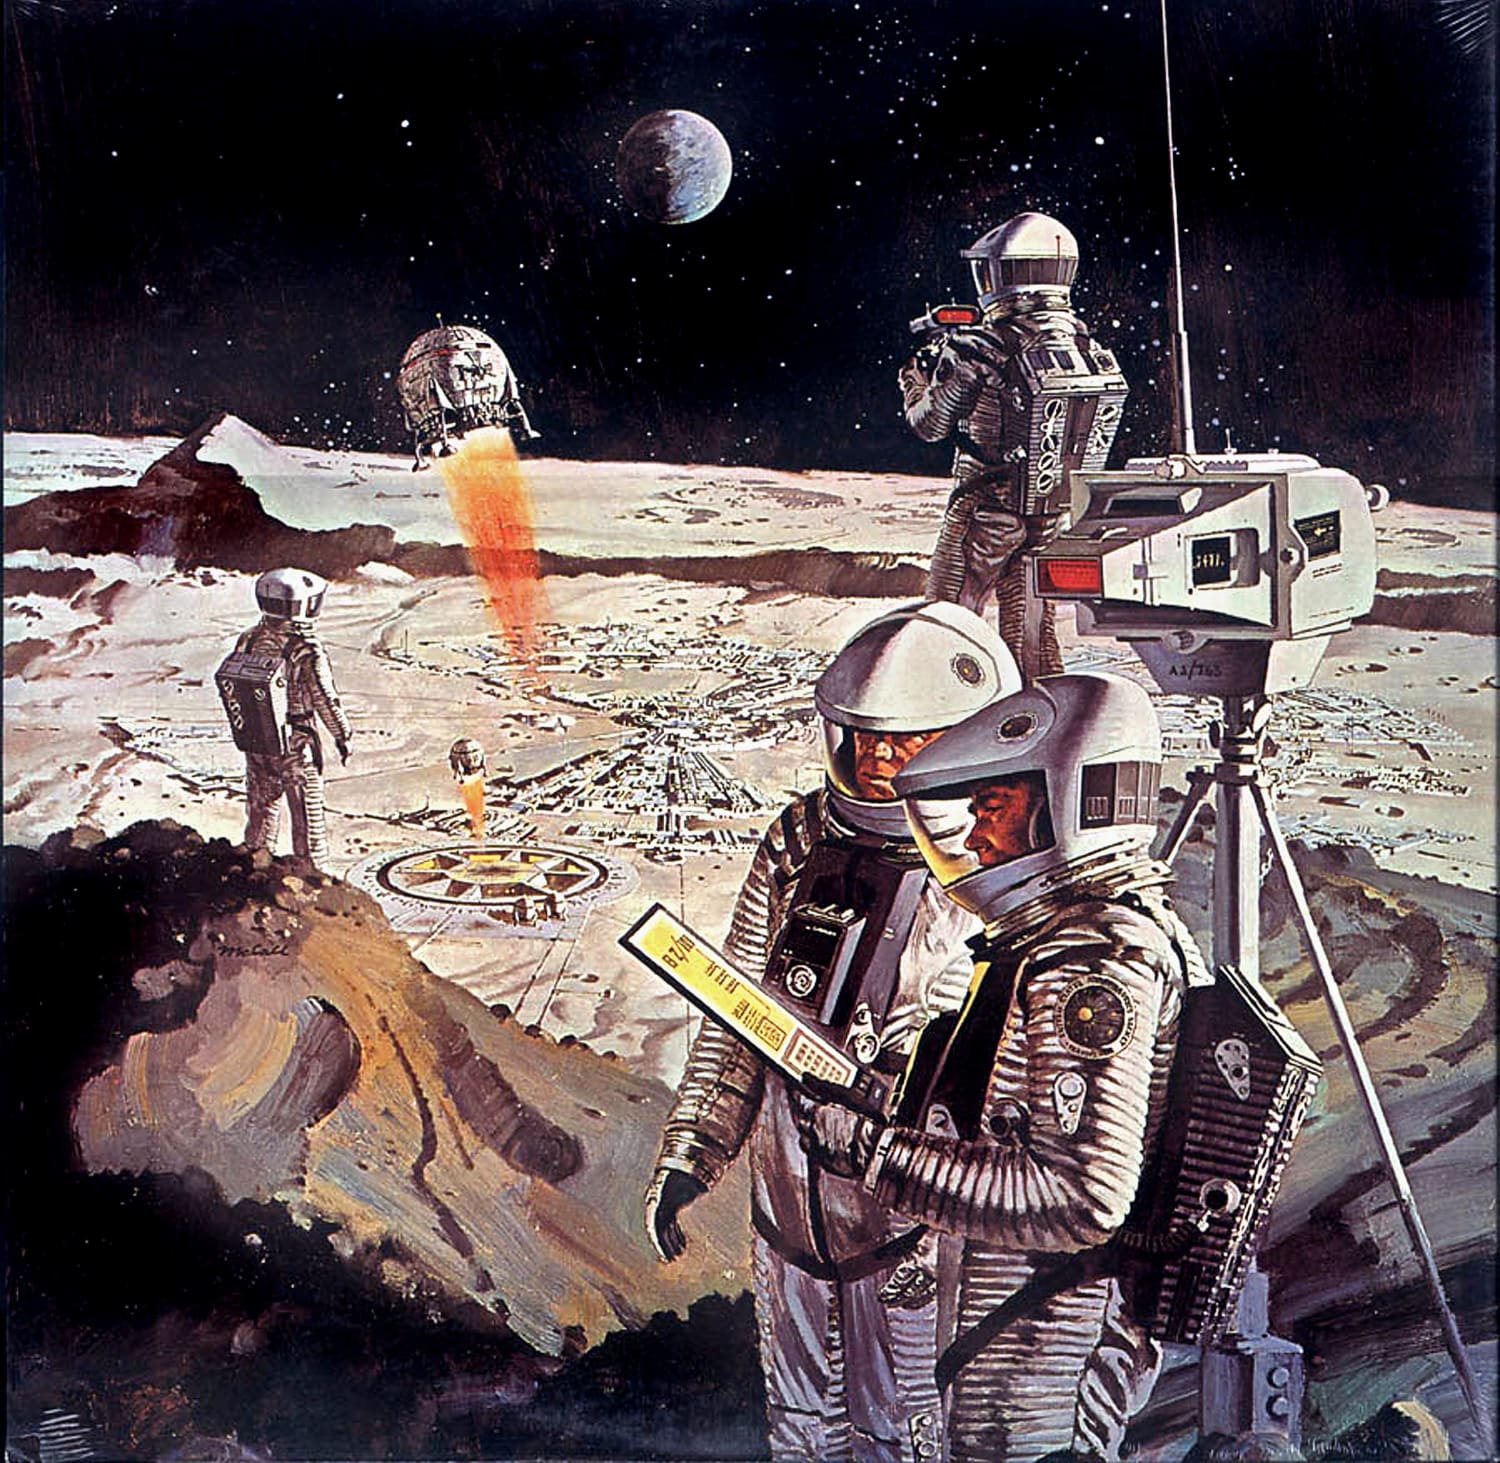 '2001 Lunar Surface' by Robert McCall, concept work for' 2001: A Space Odyssey' directed by Stanley Kubrick 1968